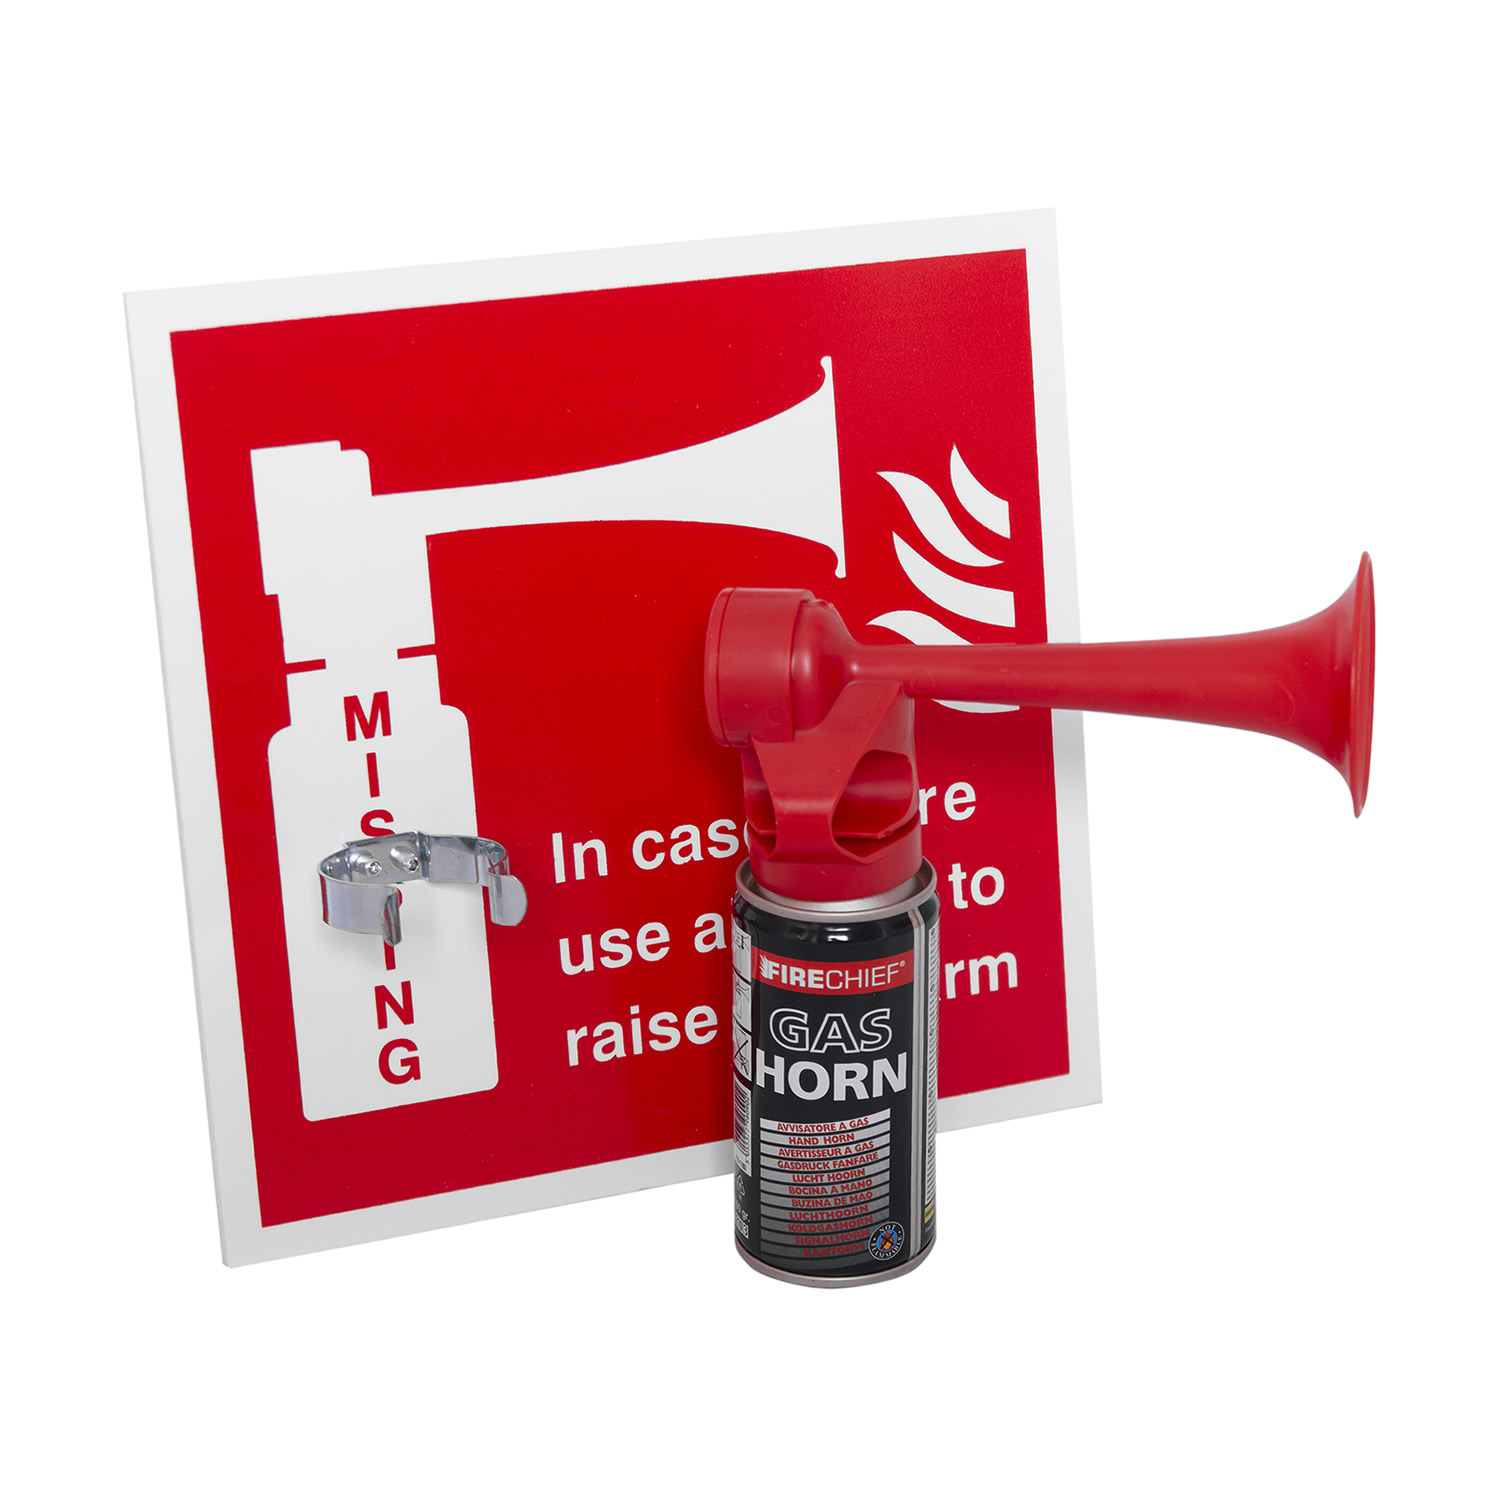 https://www.safelincs.co.uk/shopimages/products/high/fmc-air-horn-bracket-with-air-horn-in-front.jpg